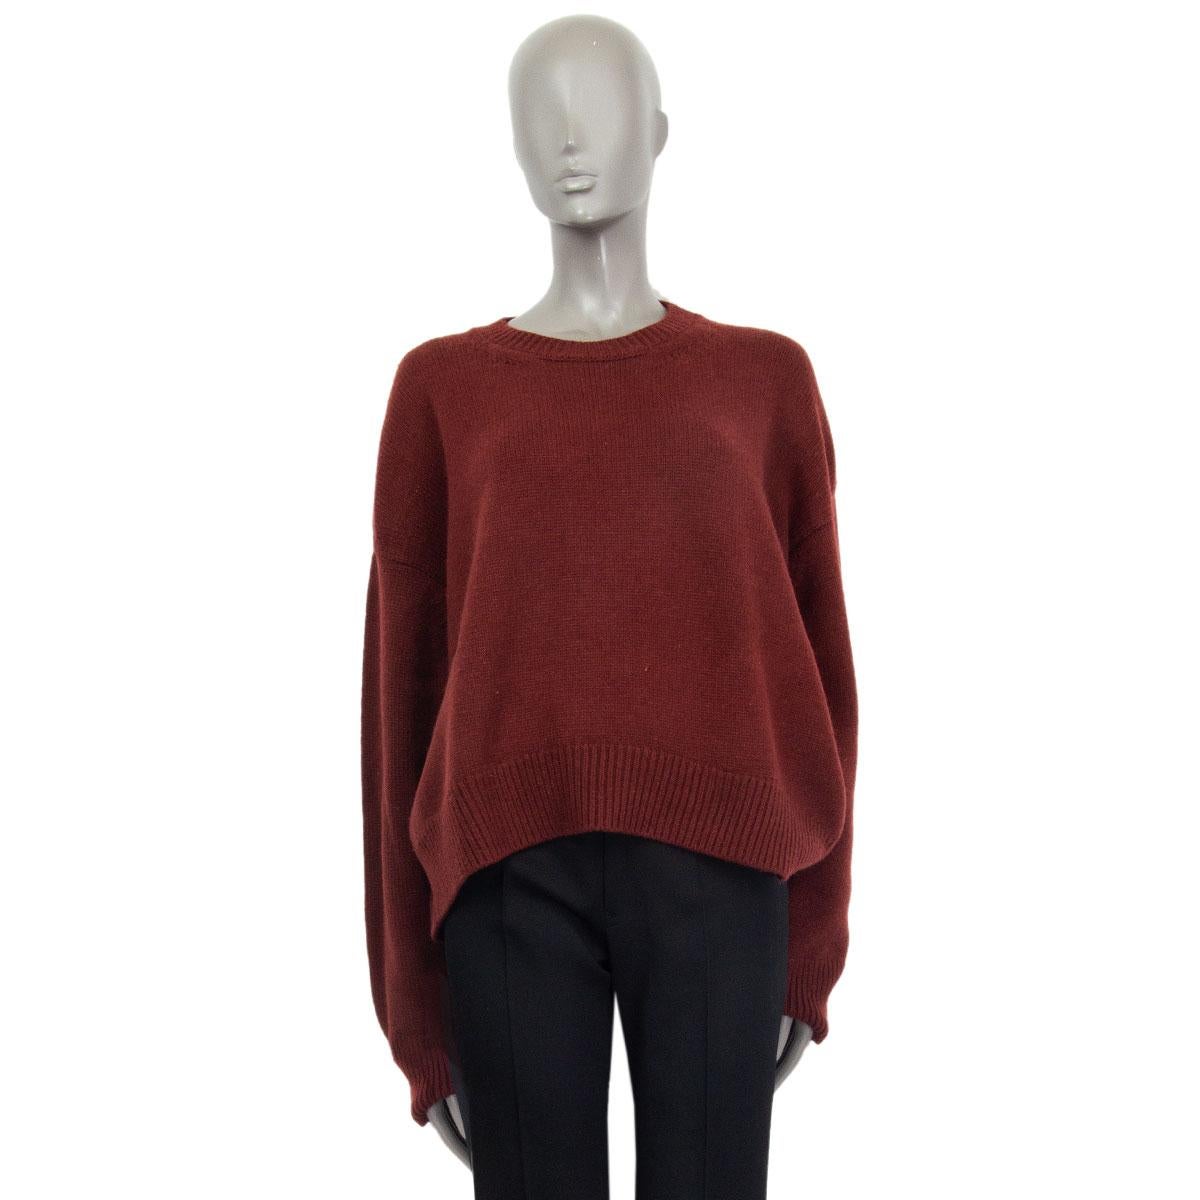 Céline long sleeve knit sweater in burgundy cashmere (88%) and polyester (12%) with a round neck. Unlined. Has been worn and is in excellent condition. 

Tag Size S
Size S
Shoulder Width 39cm (15.2in)
Bust 136cm (53in) to 140cm (54.6in)
Waist 136cm